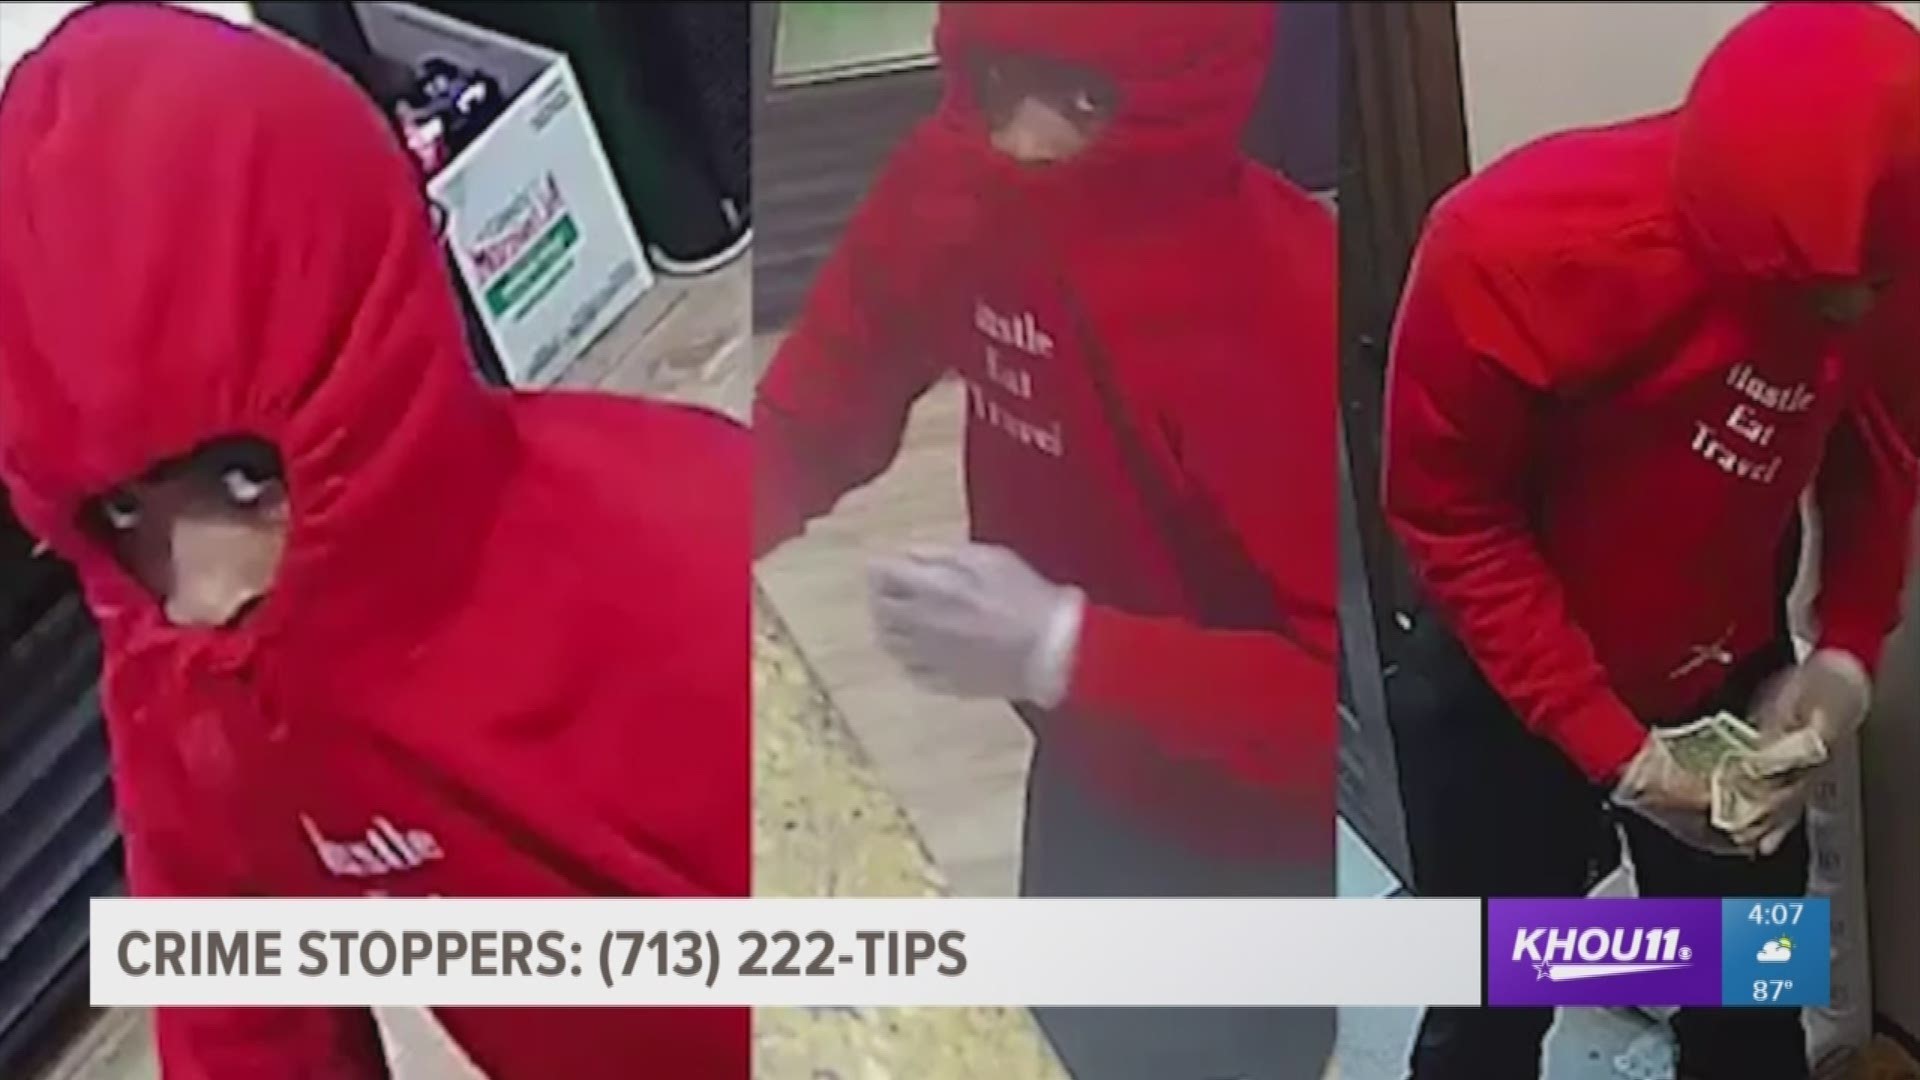 Houston Police are searching for three men accused of robbing a pizza shop near NRG Stadium.